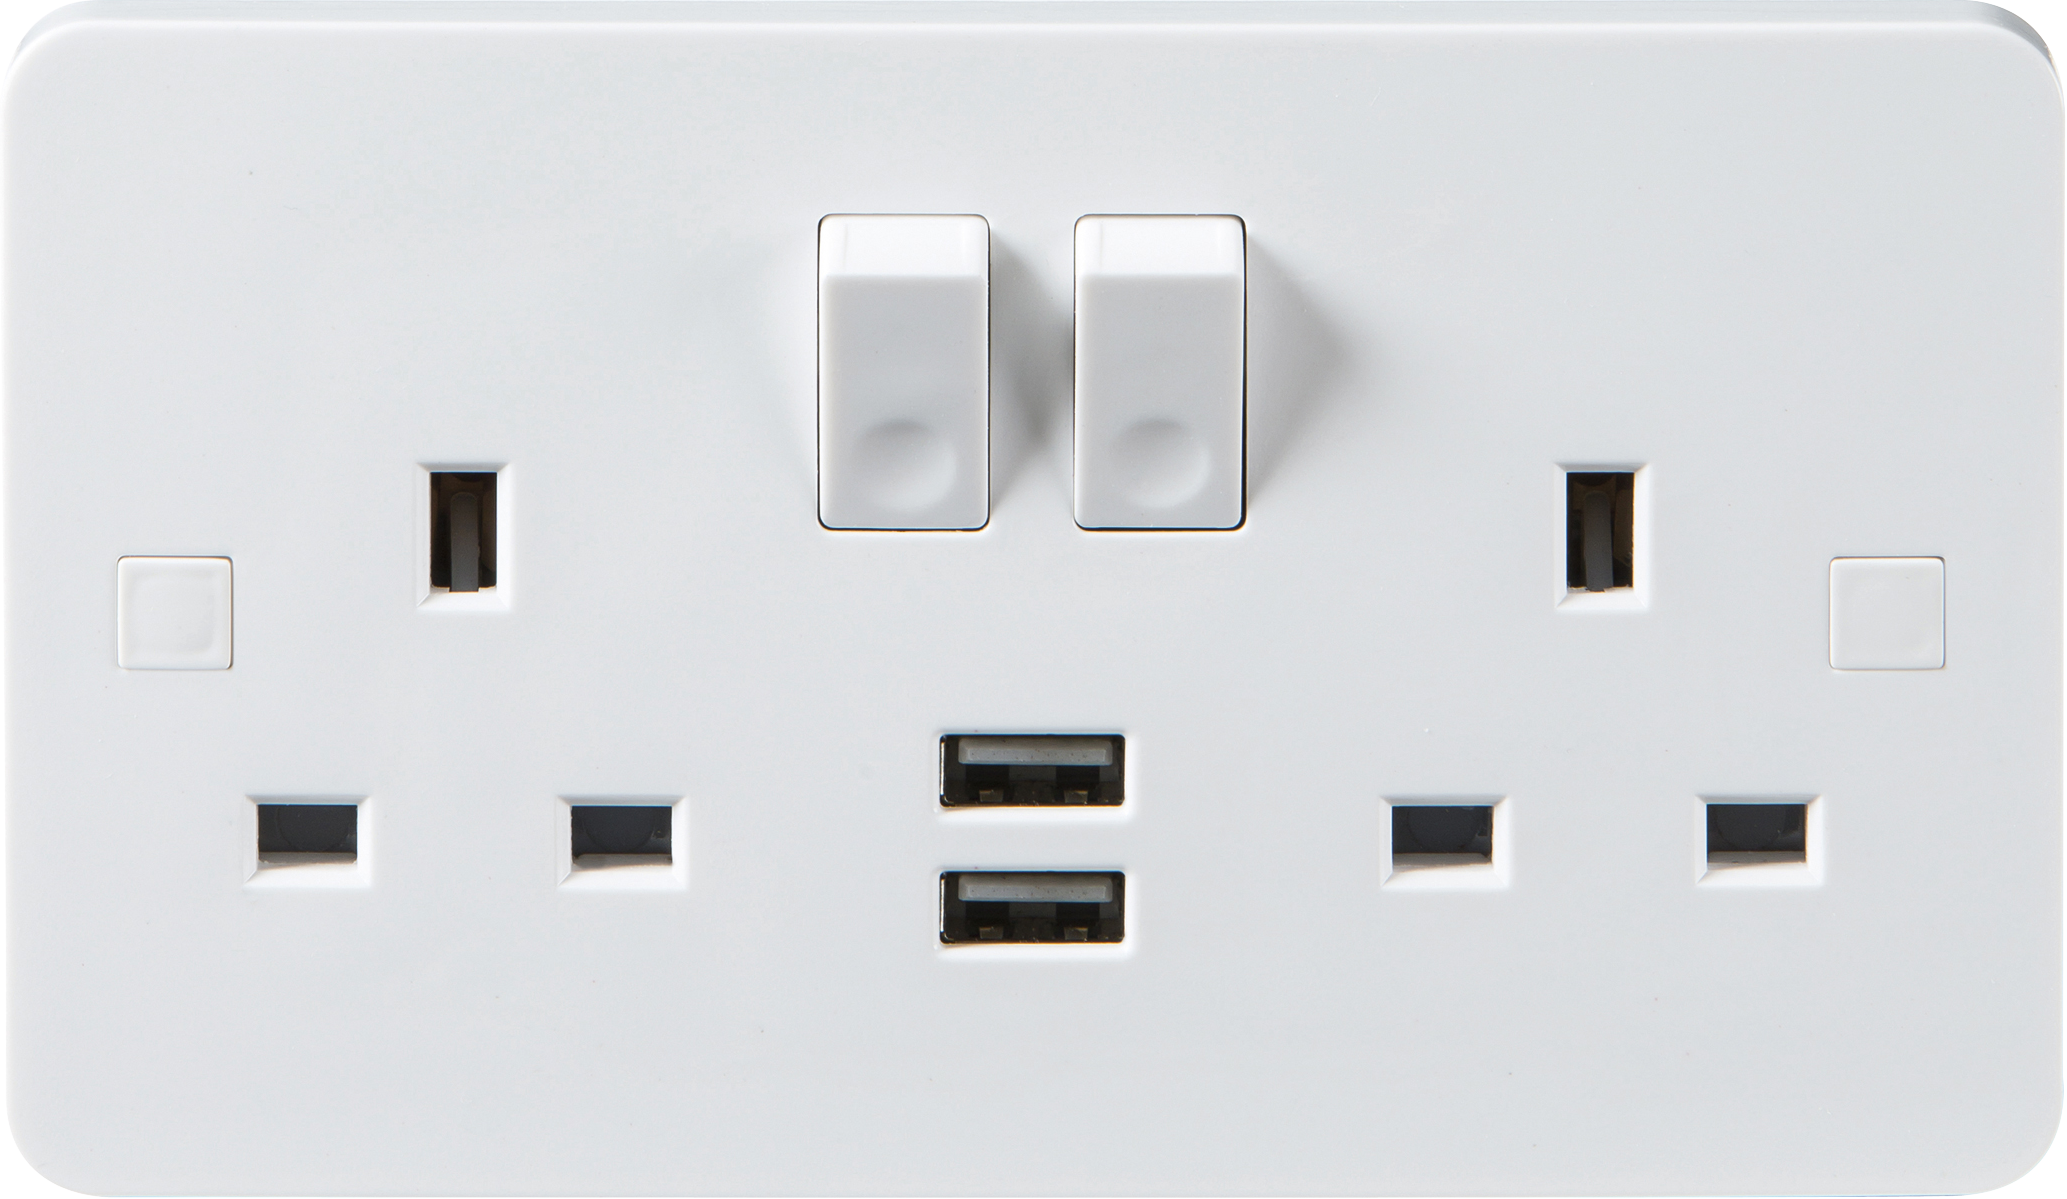 13A 2G DP Switched Socket With Dual USB Charger 5V DC 2A (2 X 1000mA) - 9mm - PU9902 